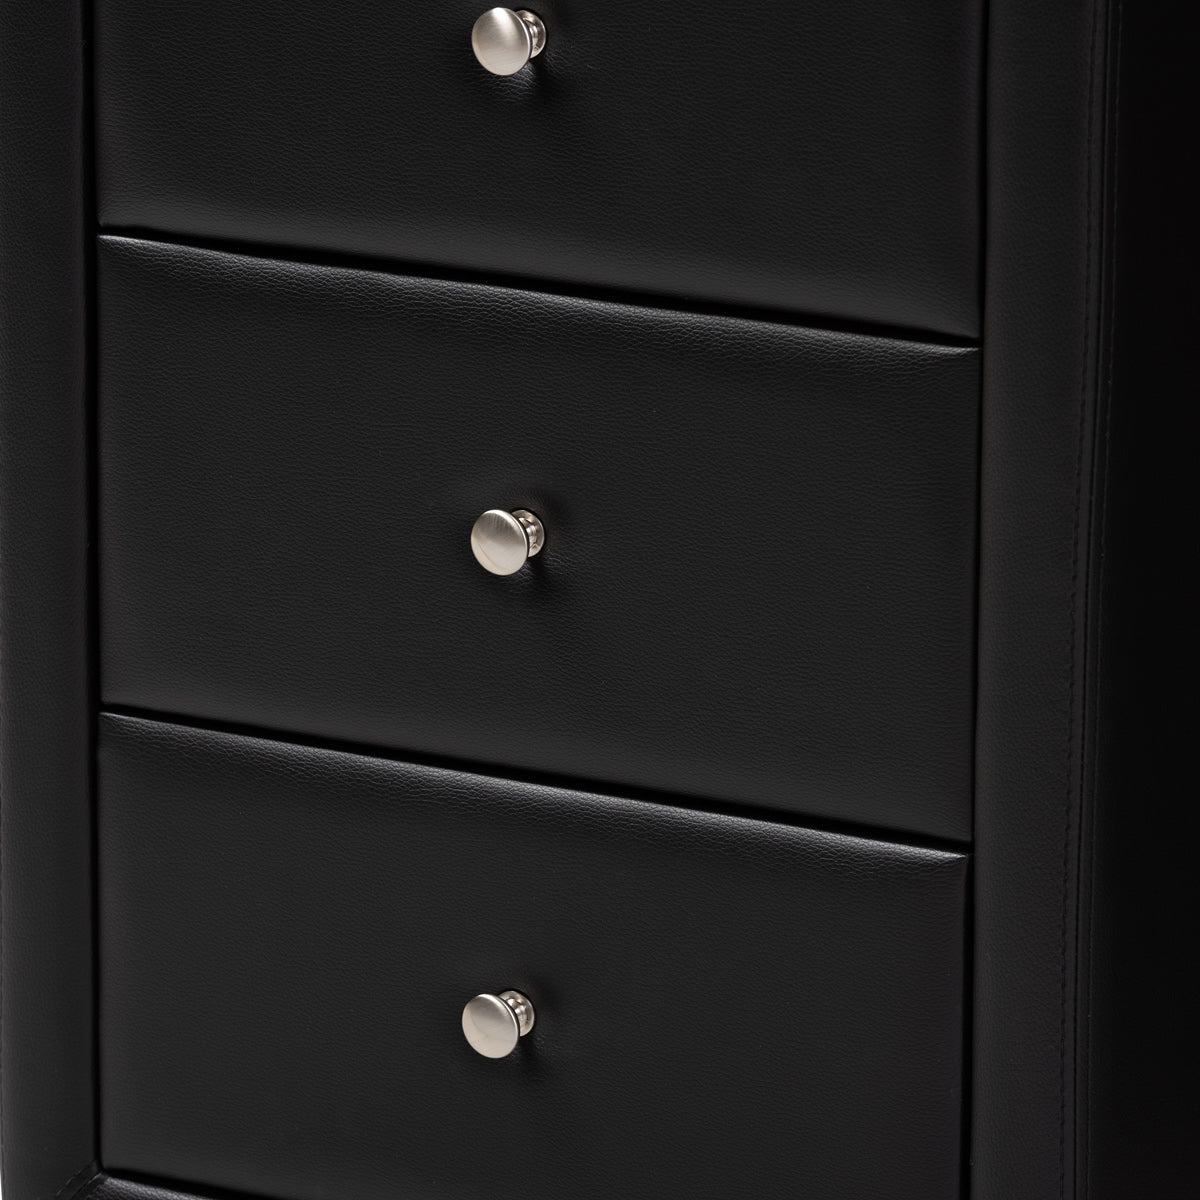 Baxton Studio Tessa Modern and Contemporary Black Faux Leather Upholstered 3-Drawer Nightstand Baxton Studio-nightstands-Minimal And Modern - 5